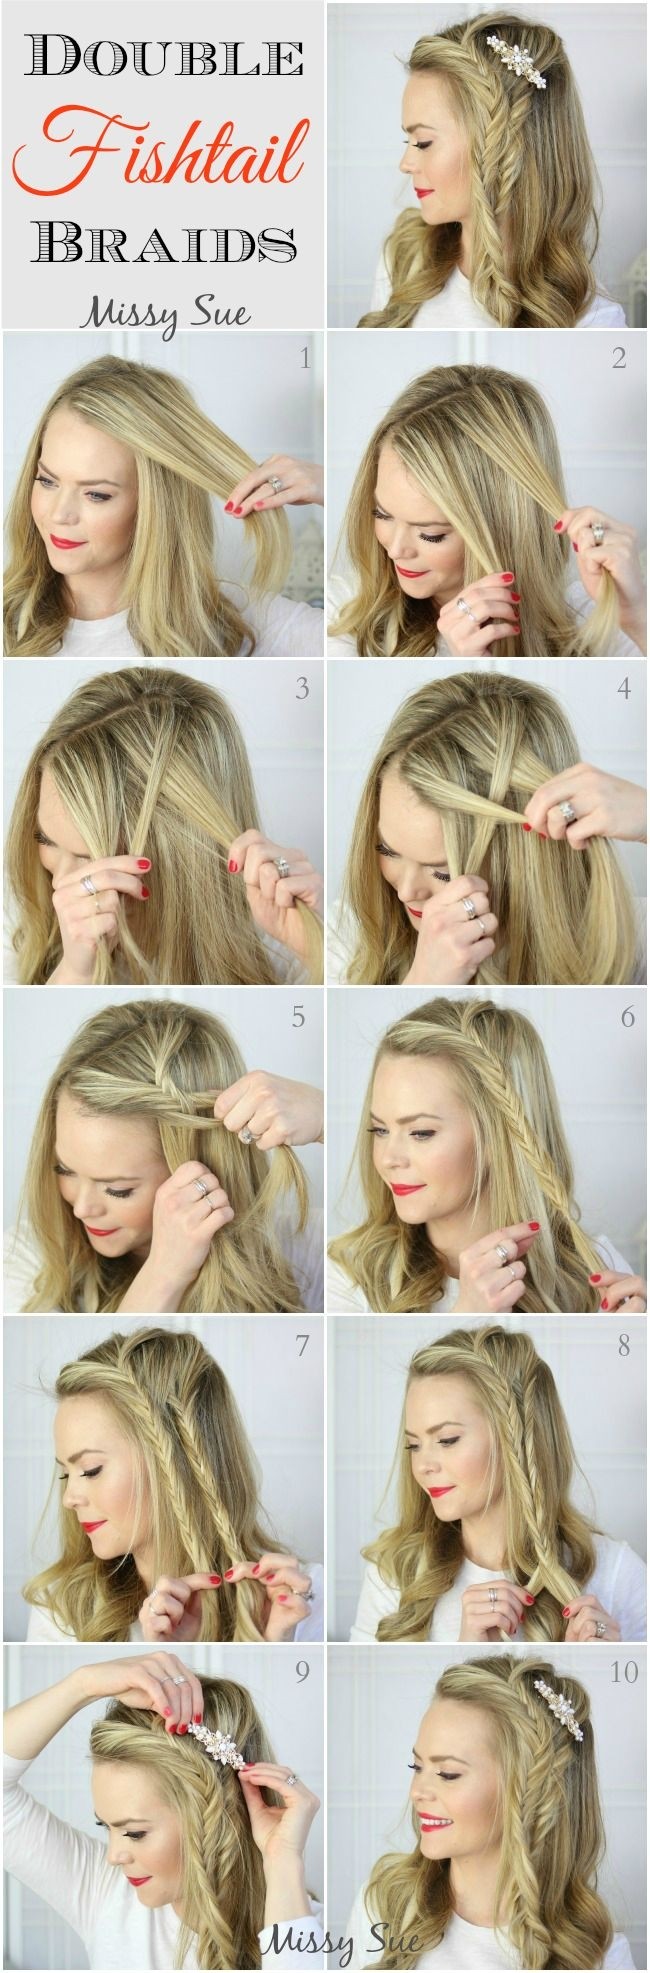 Double Fishtail Side Braids Tutorial: Long Hairstyles Ideas